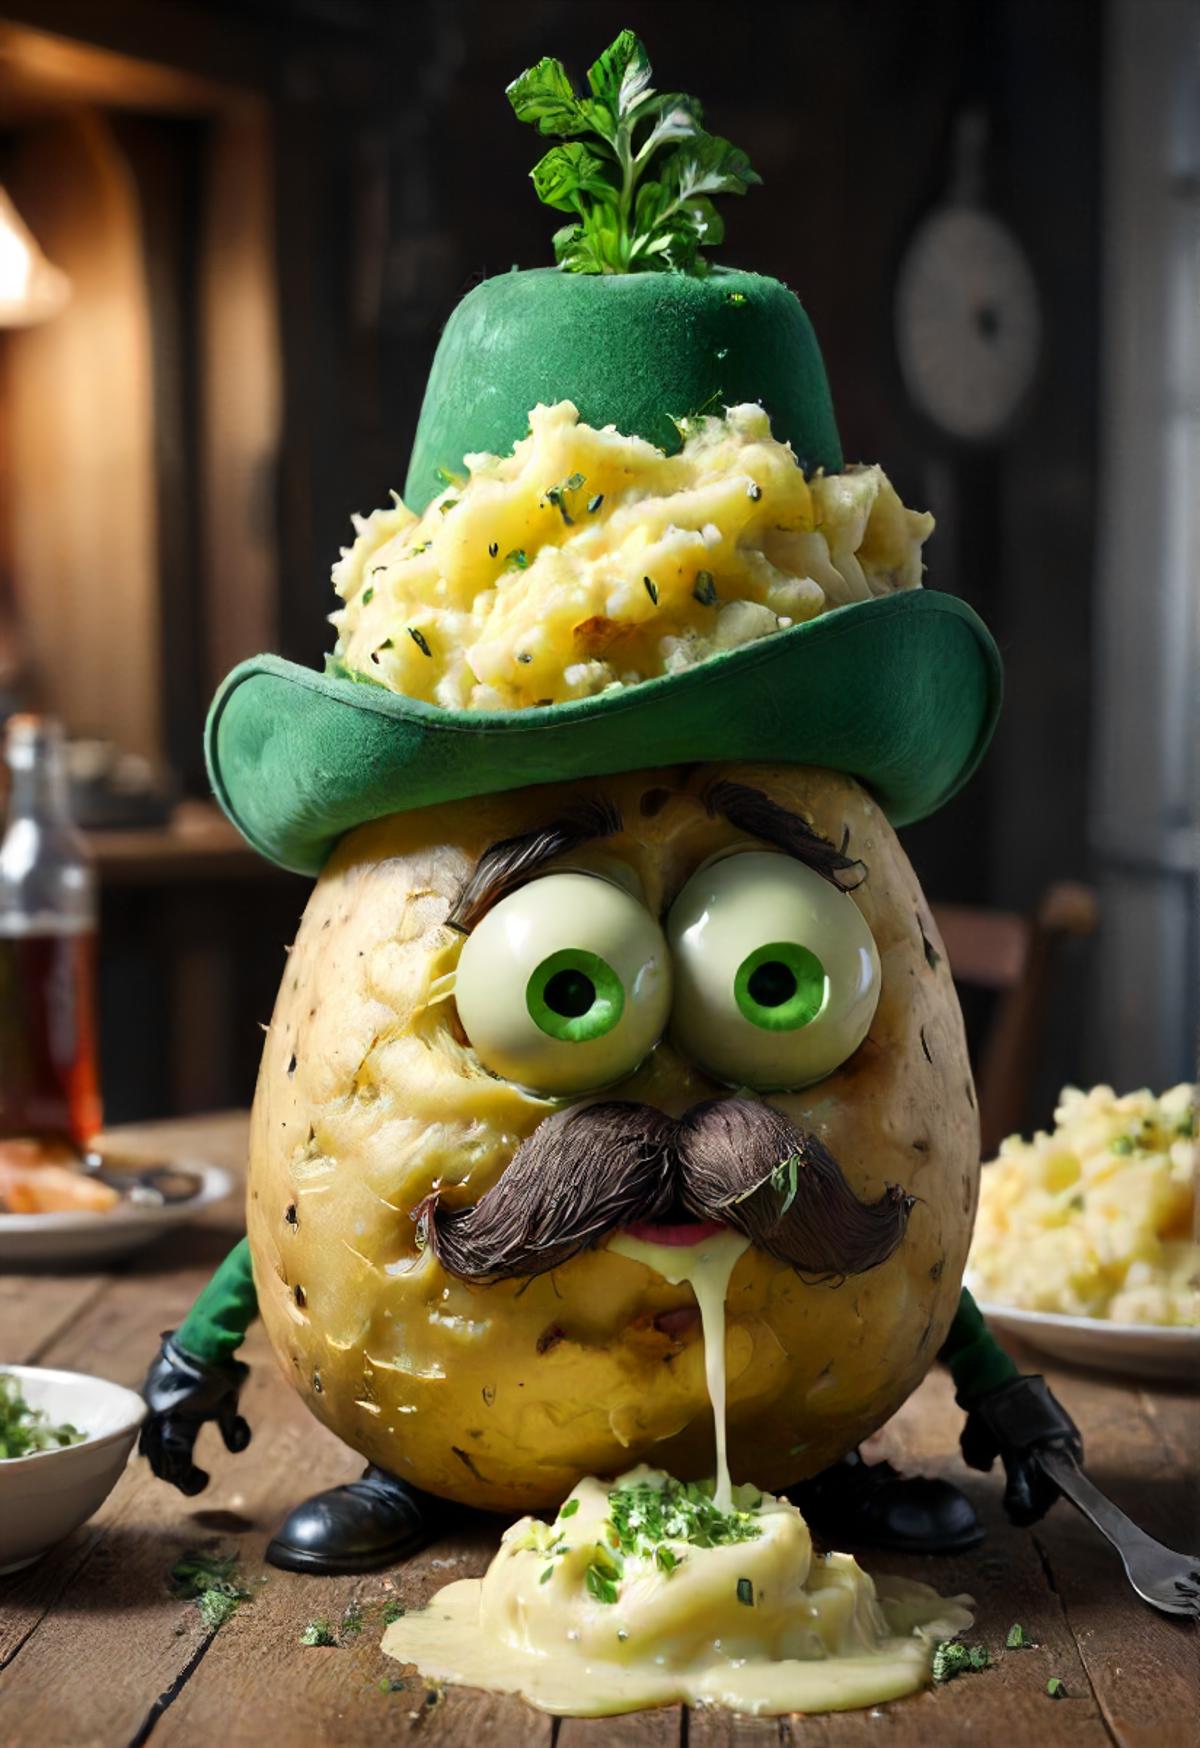 night, you seem mighty drunken my dear potato friend which is wearing a green top-hat and barfing mashed-potatoes, wasted ...